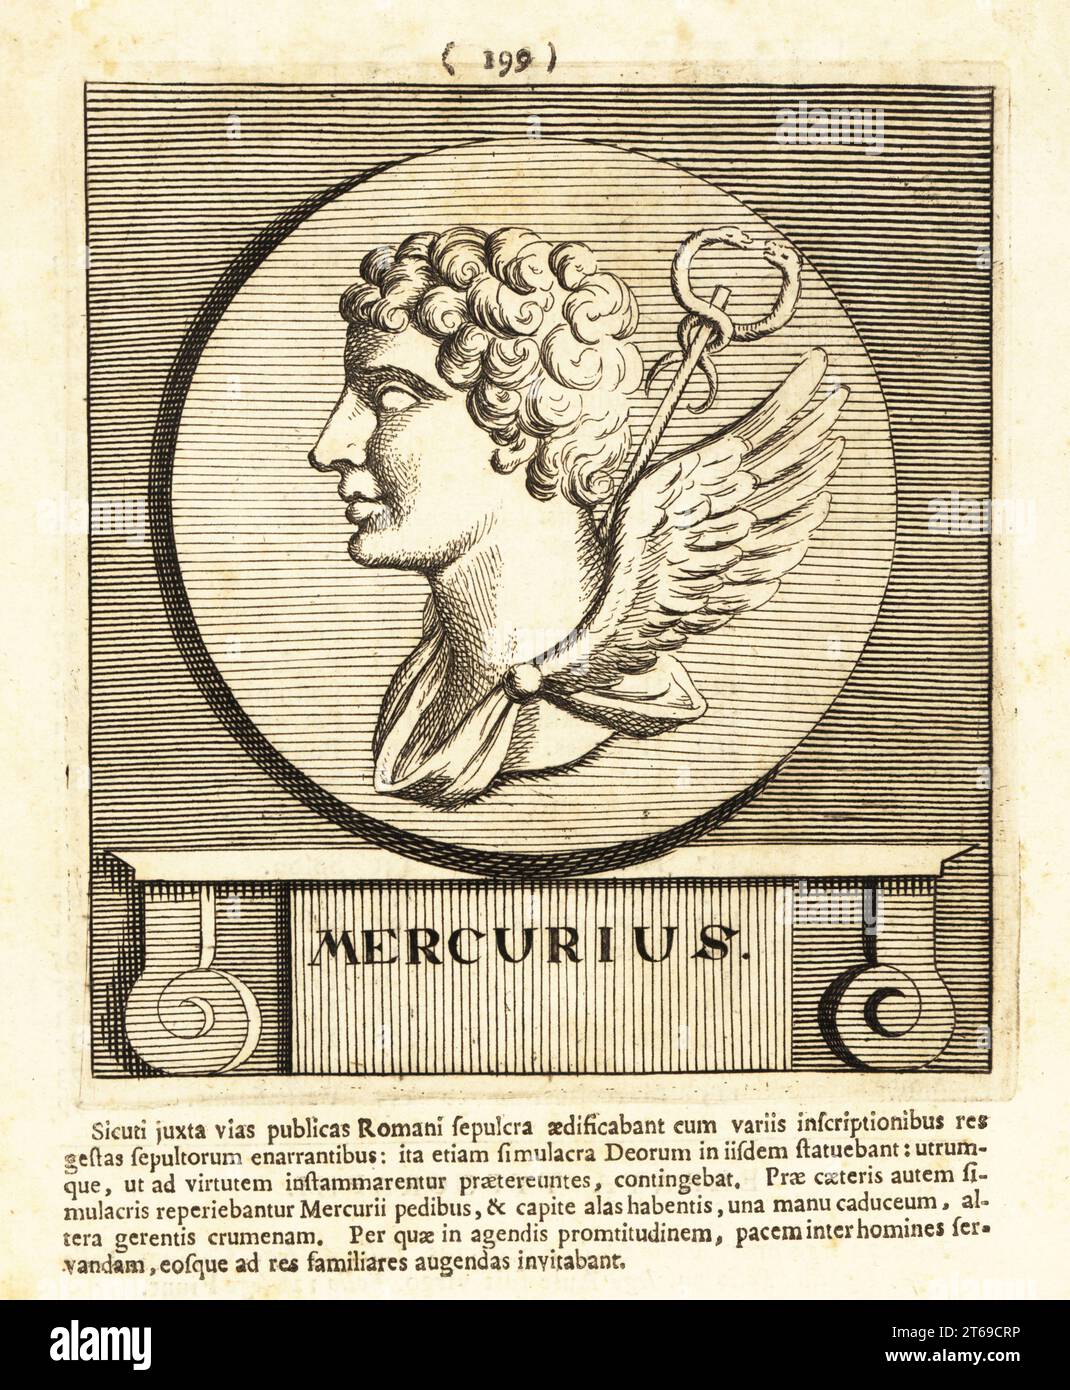 Mercury, Roman god of financial gain, commerce, eloquence, messages, communication, luck, trickery and thieves. In winged robe with caduceus staff with entwined serpents. Hermes in Greek mythology. Mercurius. Copperplate engraving by Pieter Bodart (1676-1712) from Henricus Spoors Deorum et Heroum, Virorum et Mulierum Illustrium Imagines Antiquae Illustatae, Gods and Heroes, Men and Women, Illustrated with Antique Images, Petrum, Amsterdam, 1715. First published as Favissæ utriusque antiquitatis tam Romanæ quam Græcæ in 1707. Henricus Spoor was a Dutch physician, classical scholar, poet and wri Stock Photo